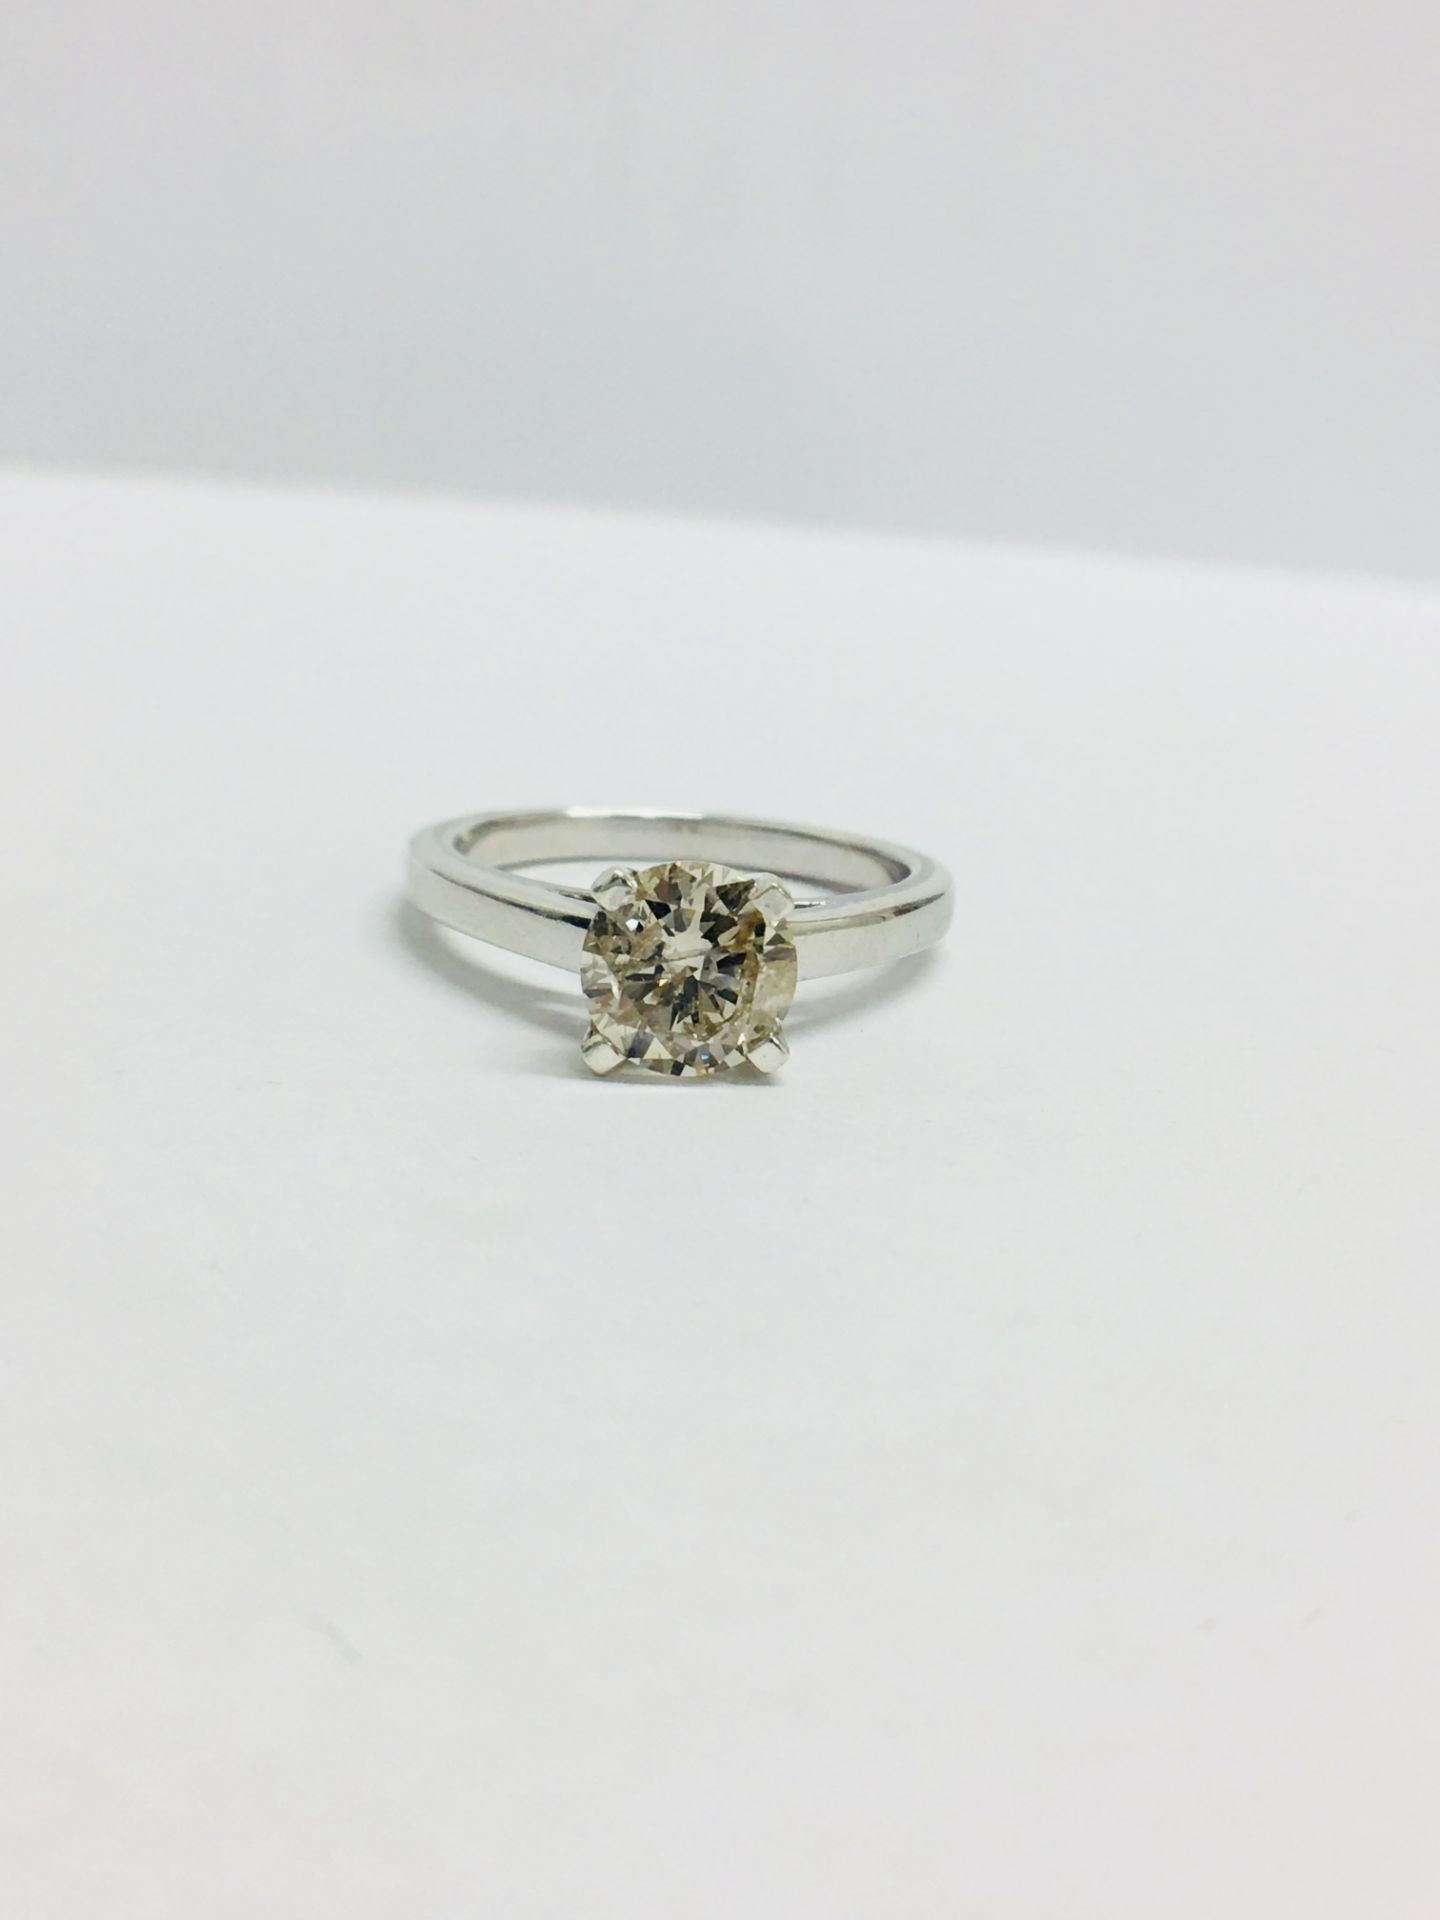 1.00ct diamond solitaire ring set in platinum. IKcolour and I1 clarity. 4 claw setting, size M. - Image 12 of 13